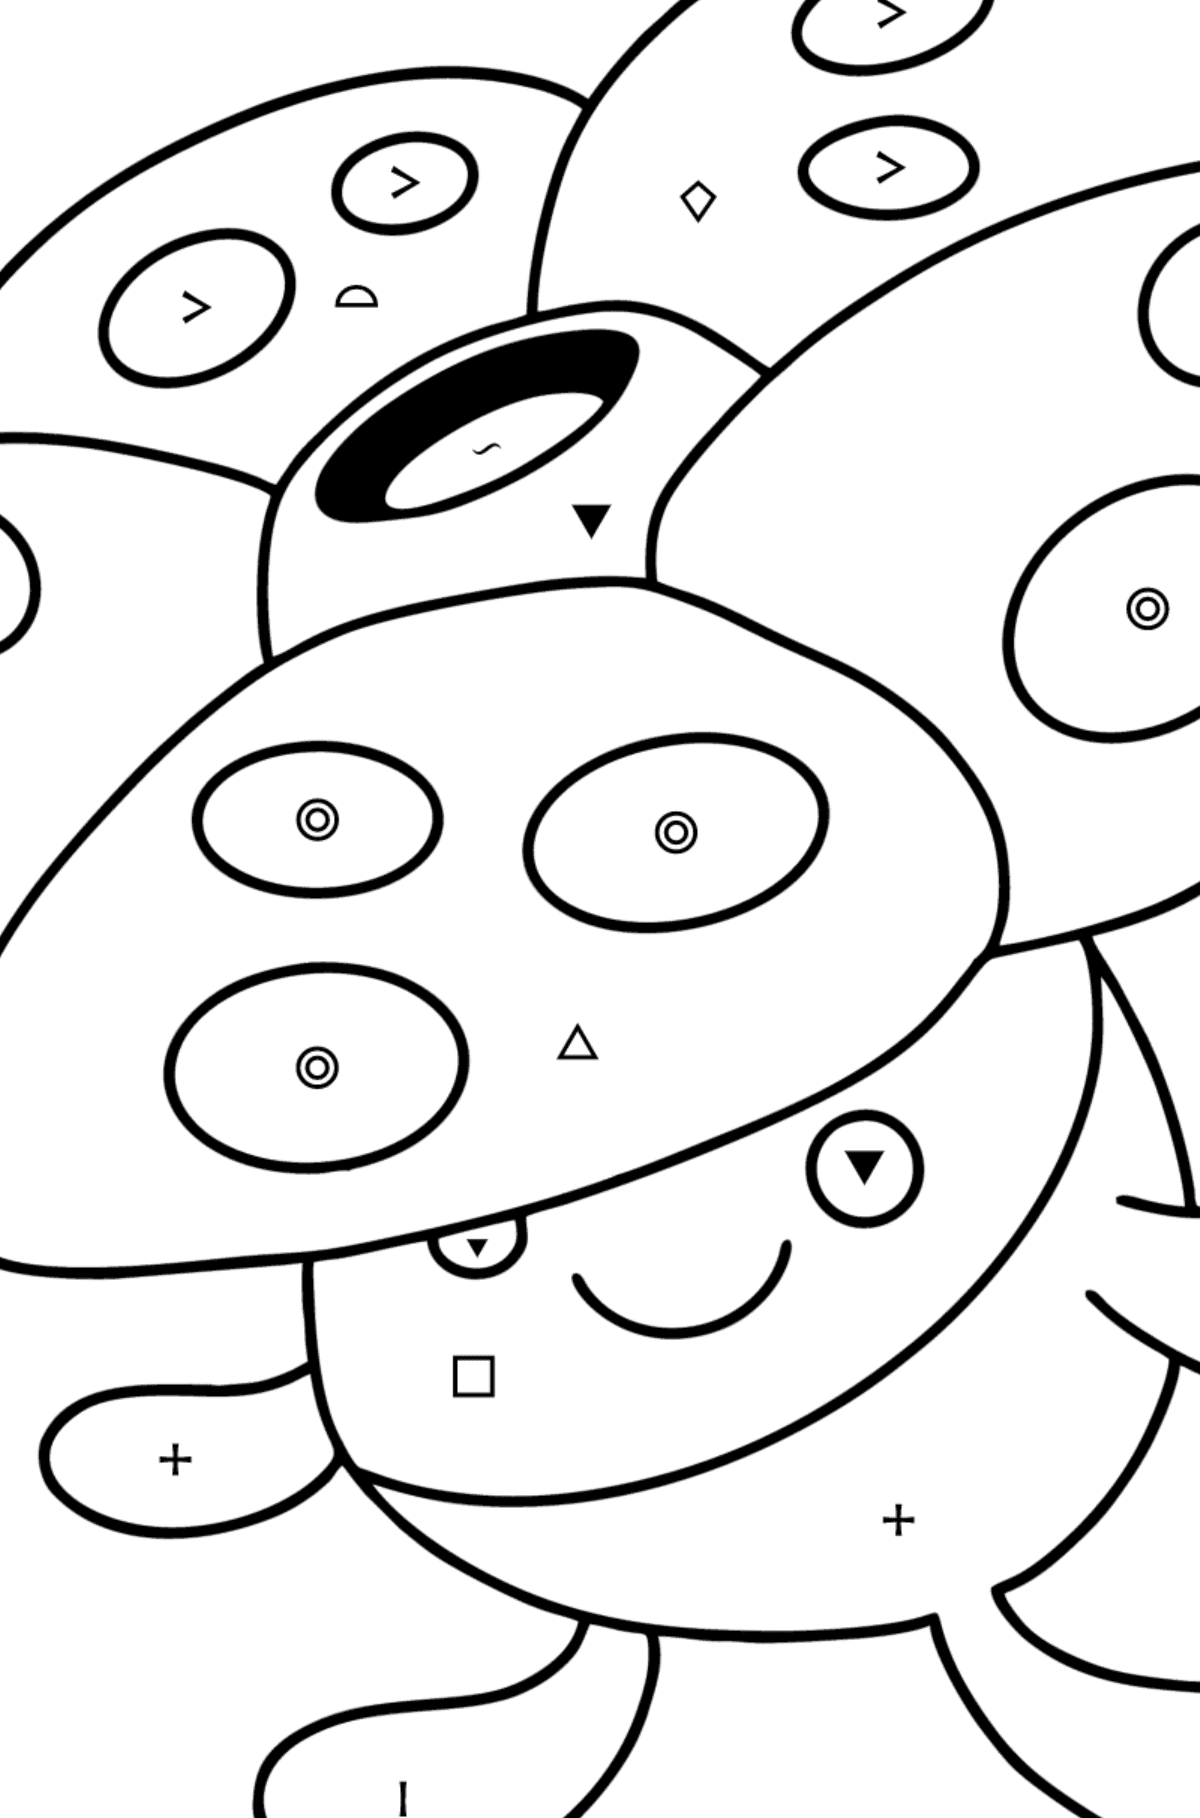 Coloring page Pokémon Go Vileplume - Coloring by Symbols and Geometric Shapes for Kids